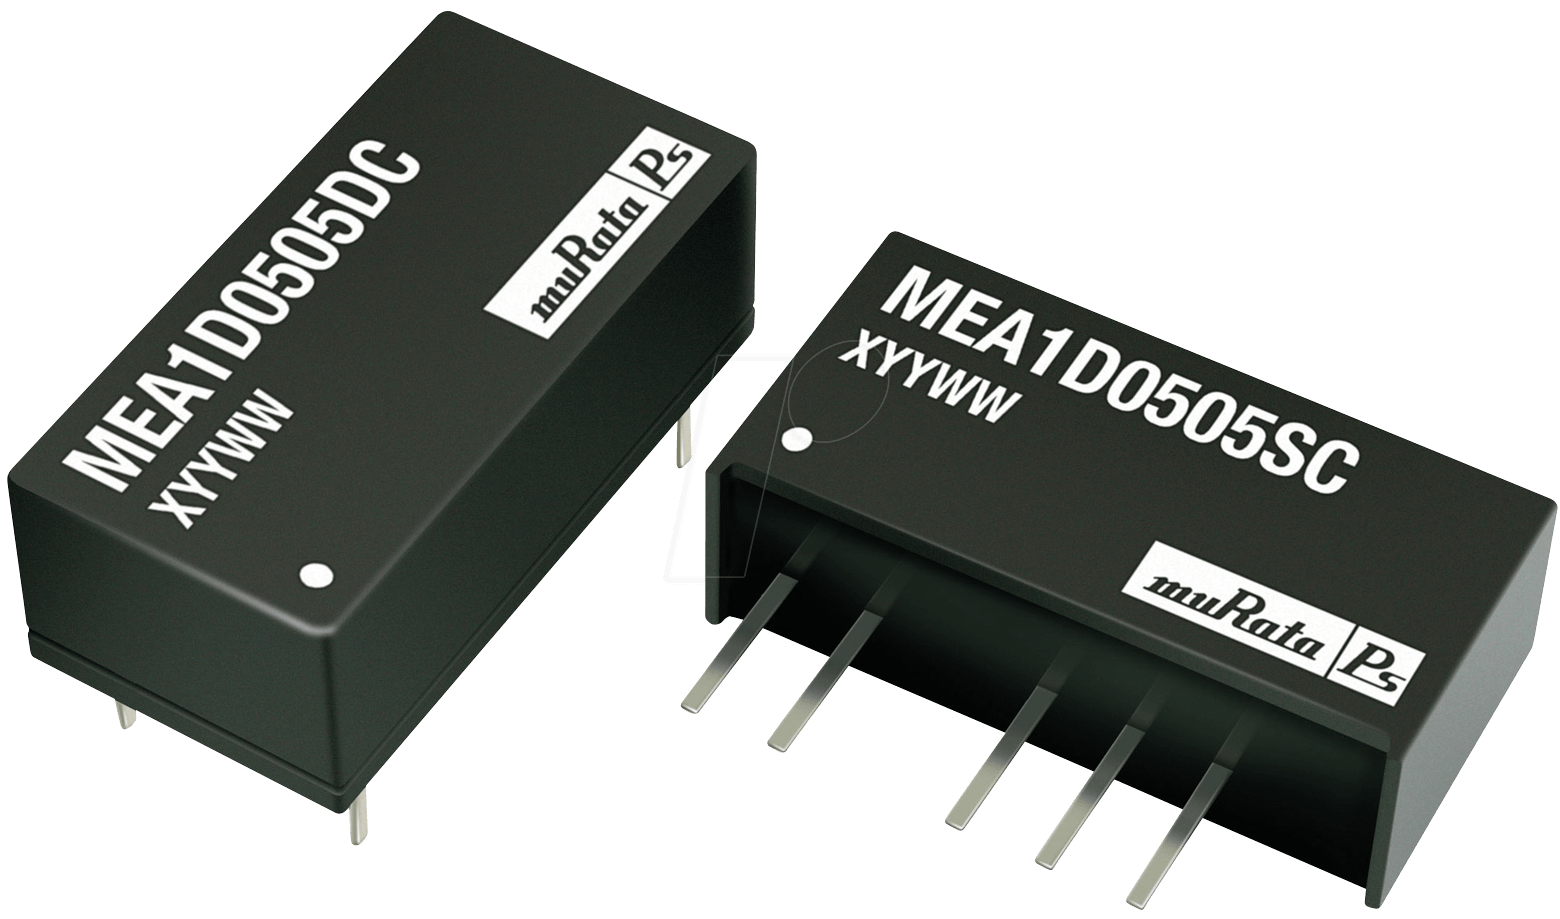 MEA1D1505SC - DC/DC-Wandler MEA, 1 W, 5 V, 100 mA, SIL, Dual von MURATA POWER SOLUTIONS